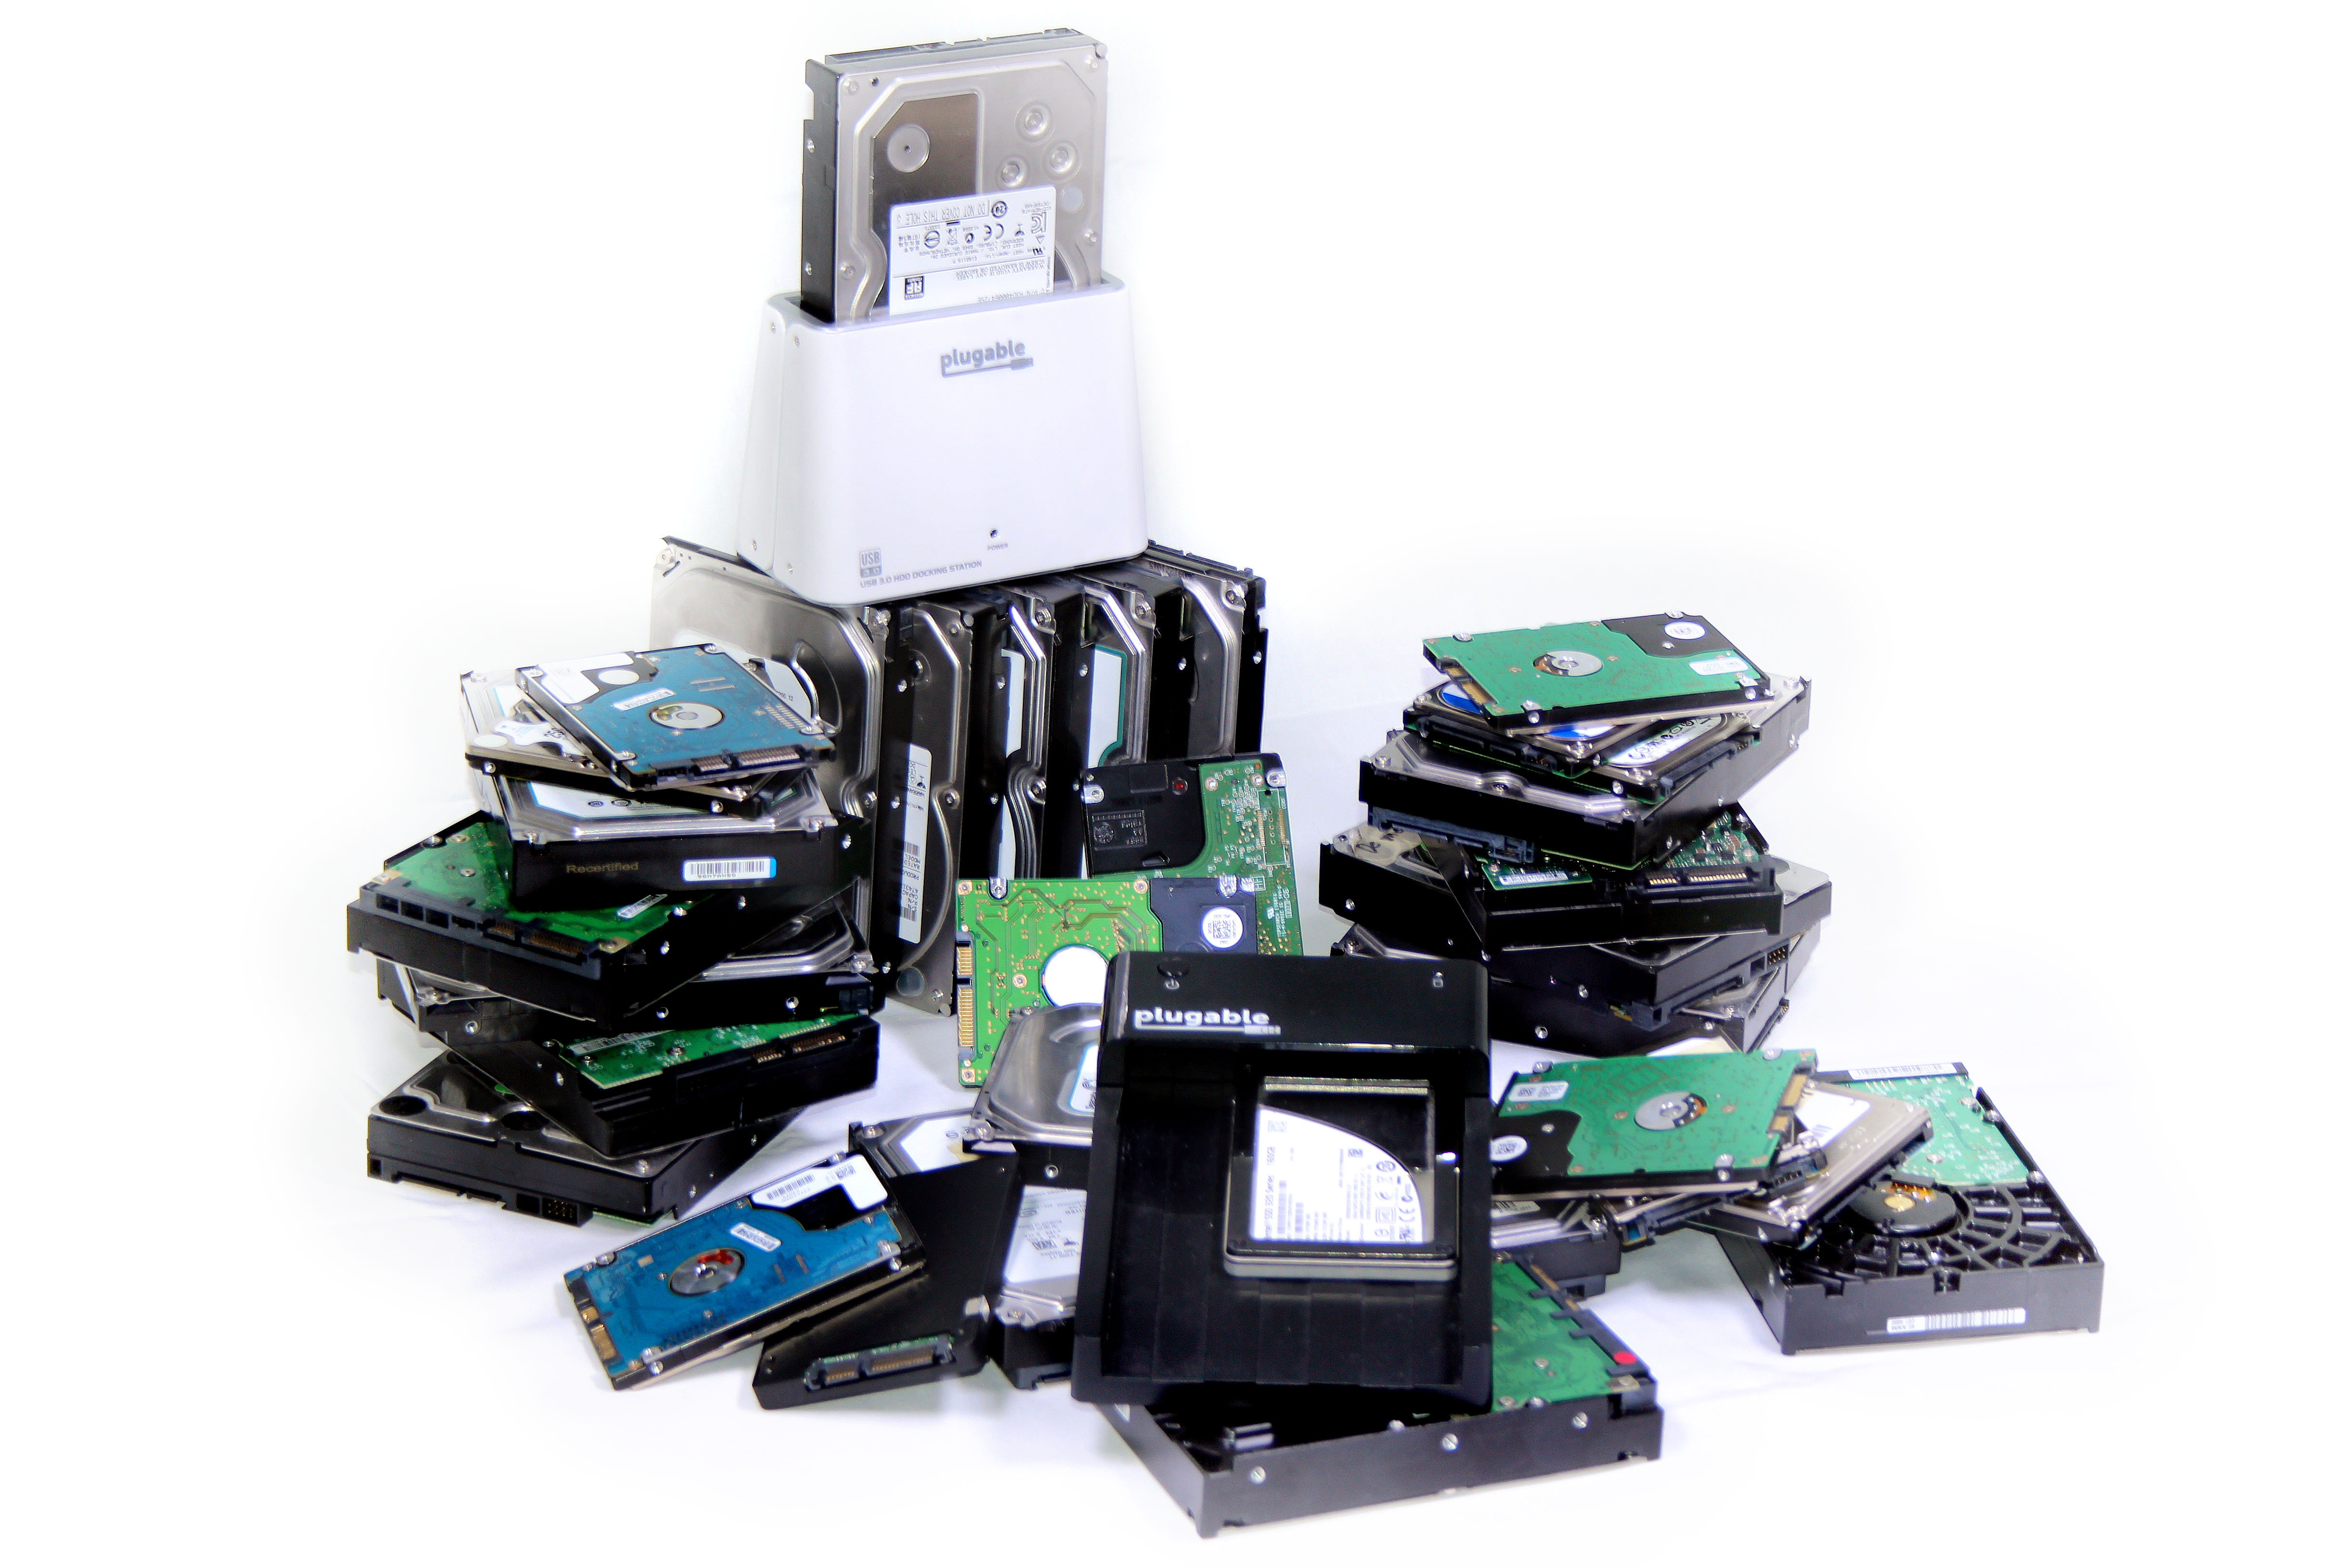 A pile of hard drives